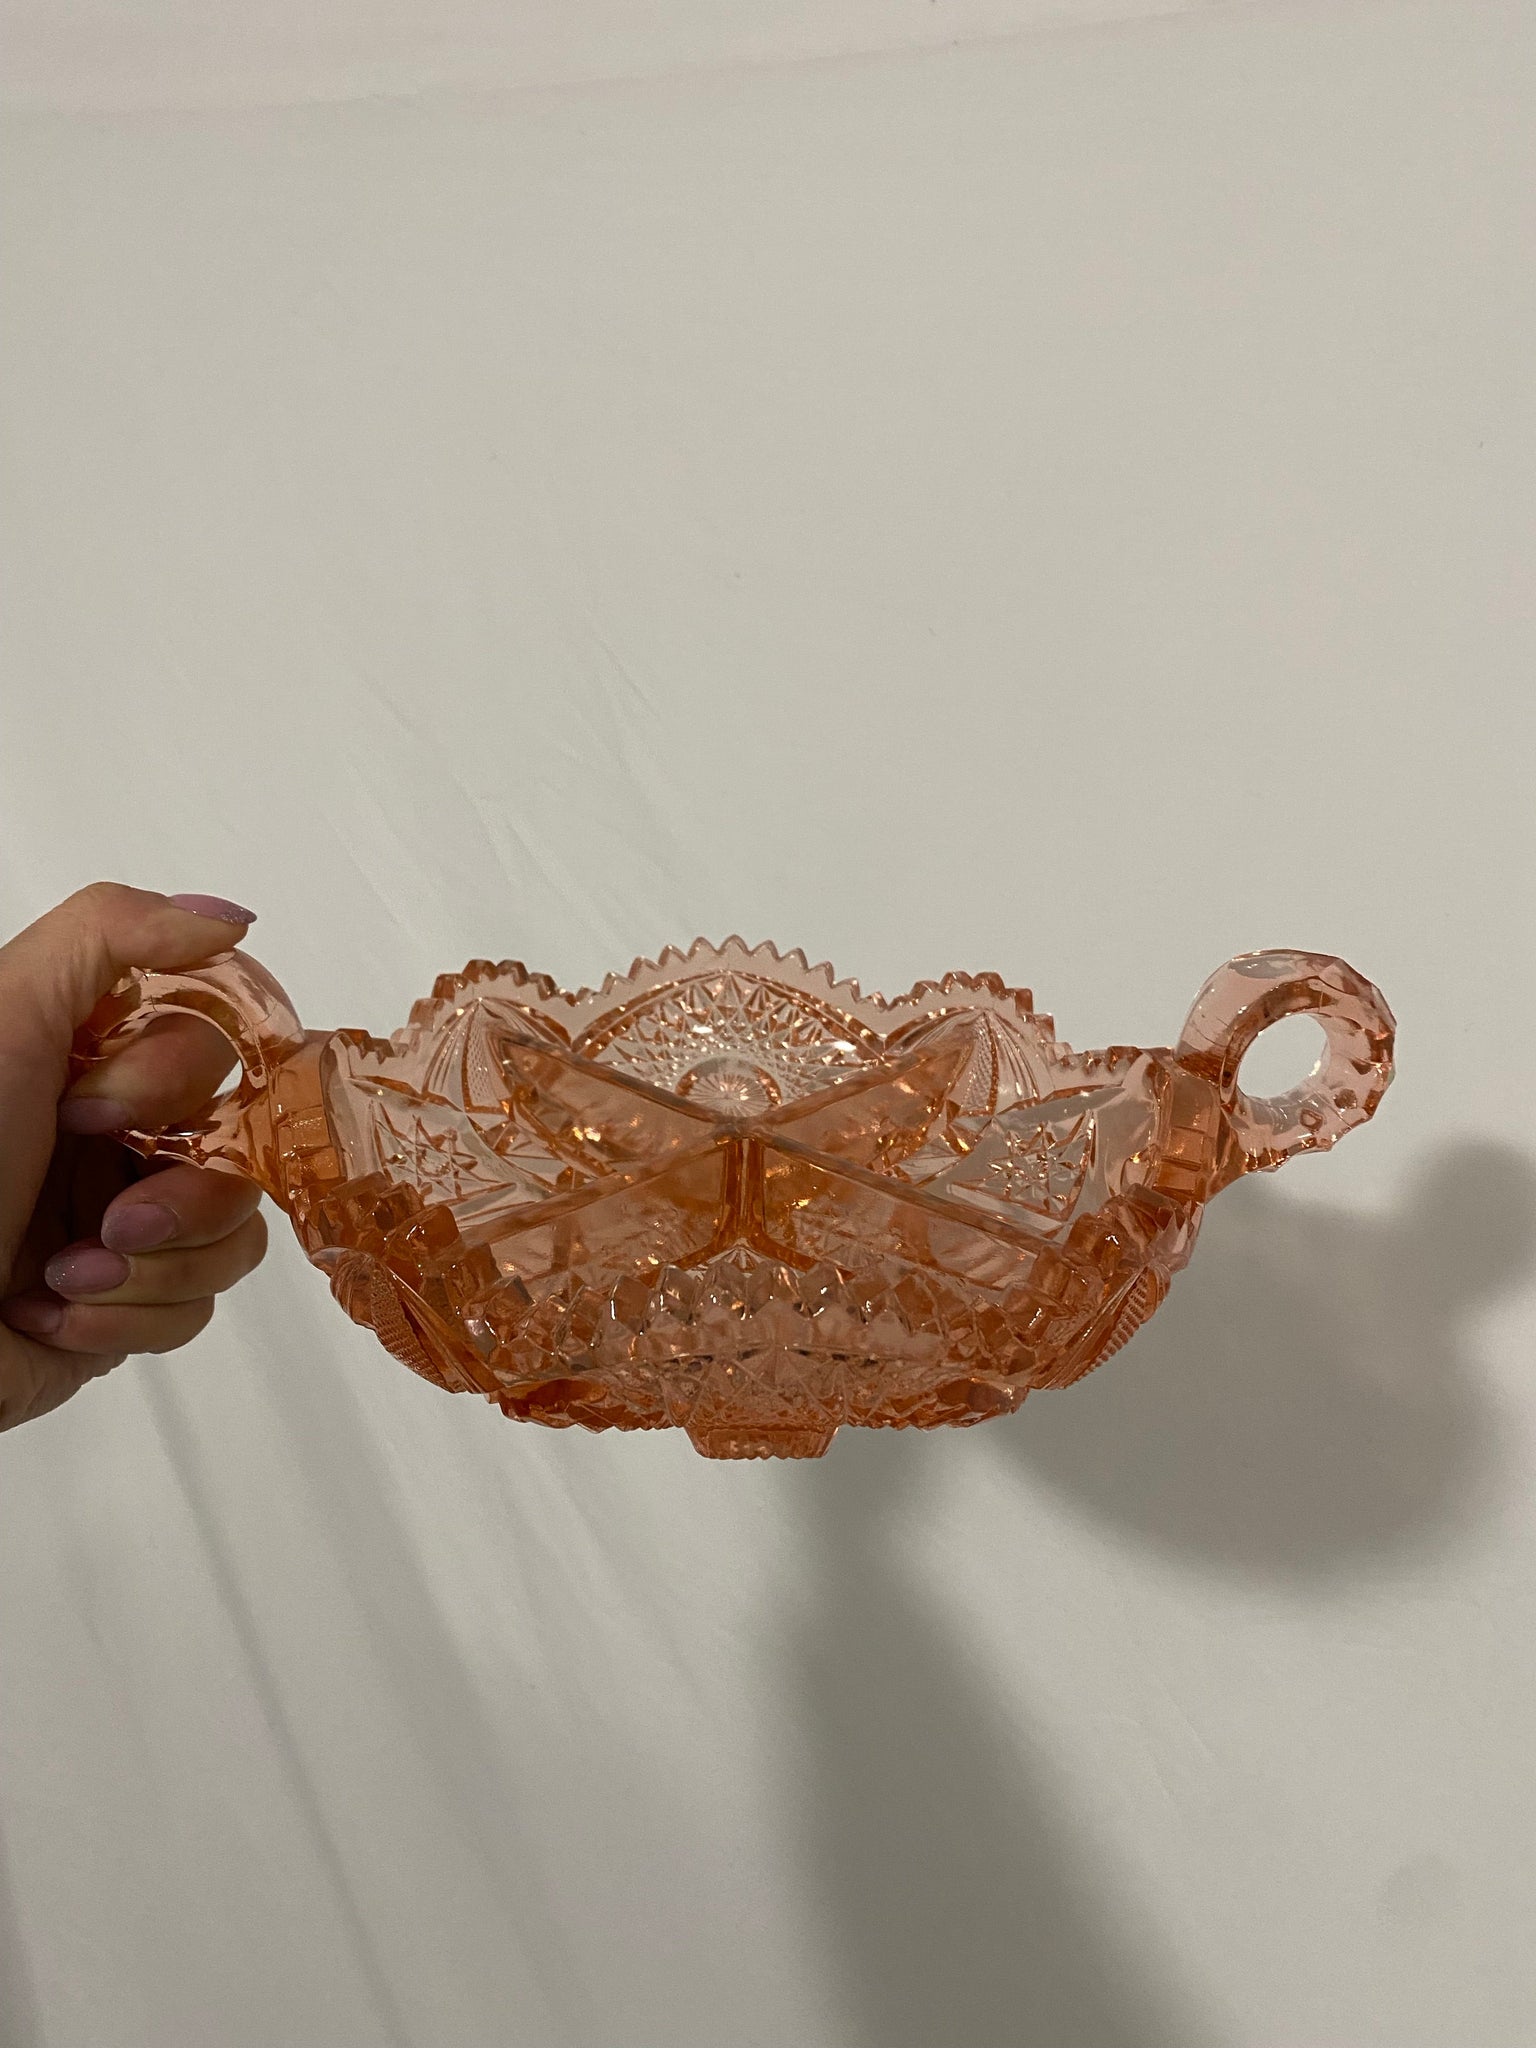 Thicc textured pink glass bowl with handles